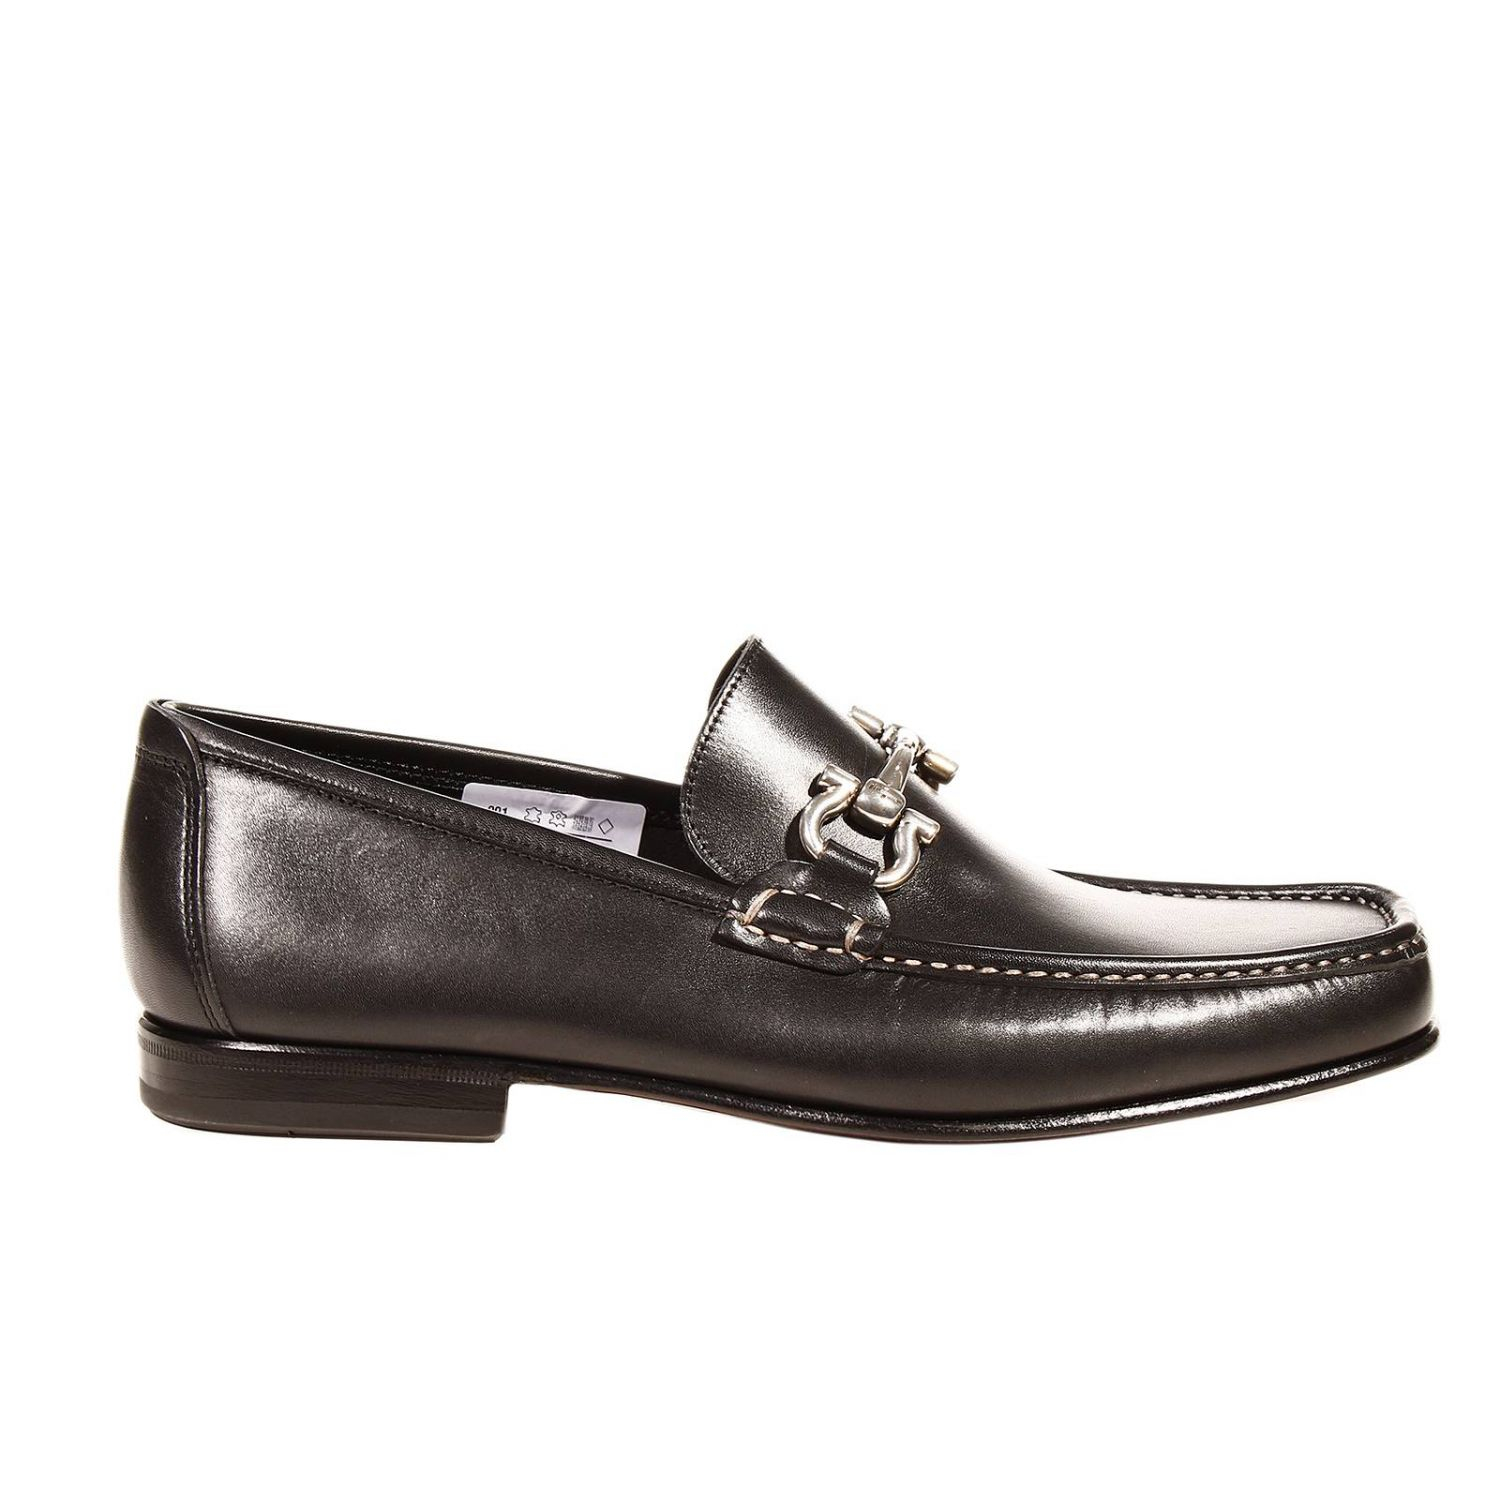 Ferragamo Giordano Leather With Horsebit And Leather Sole Loafer in ...